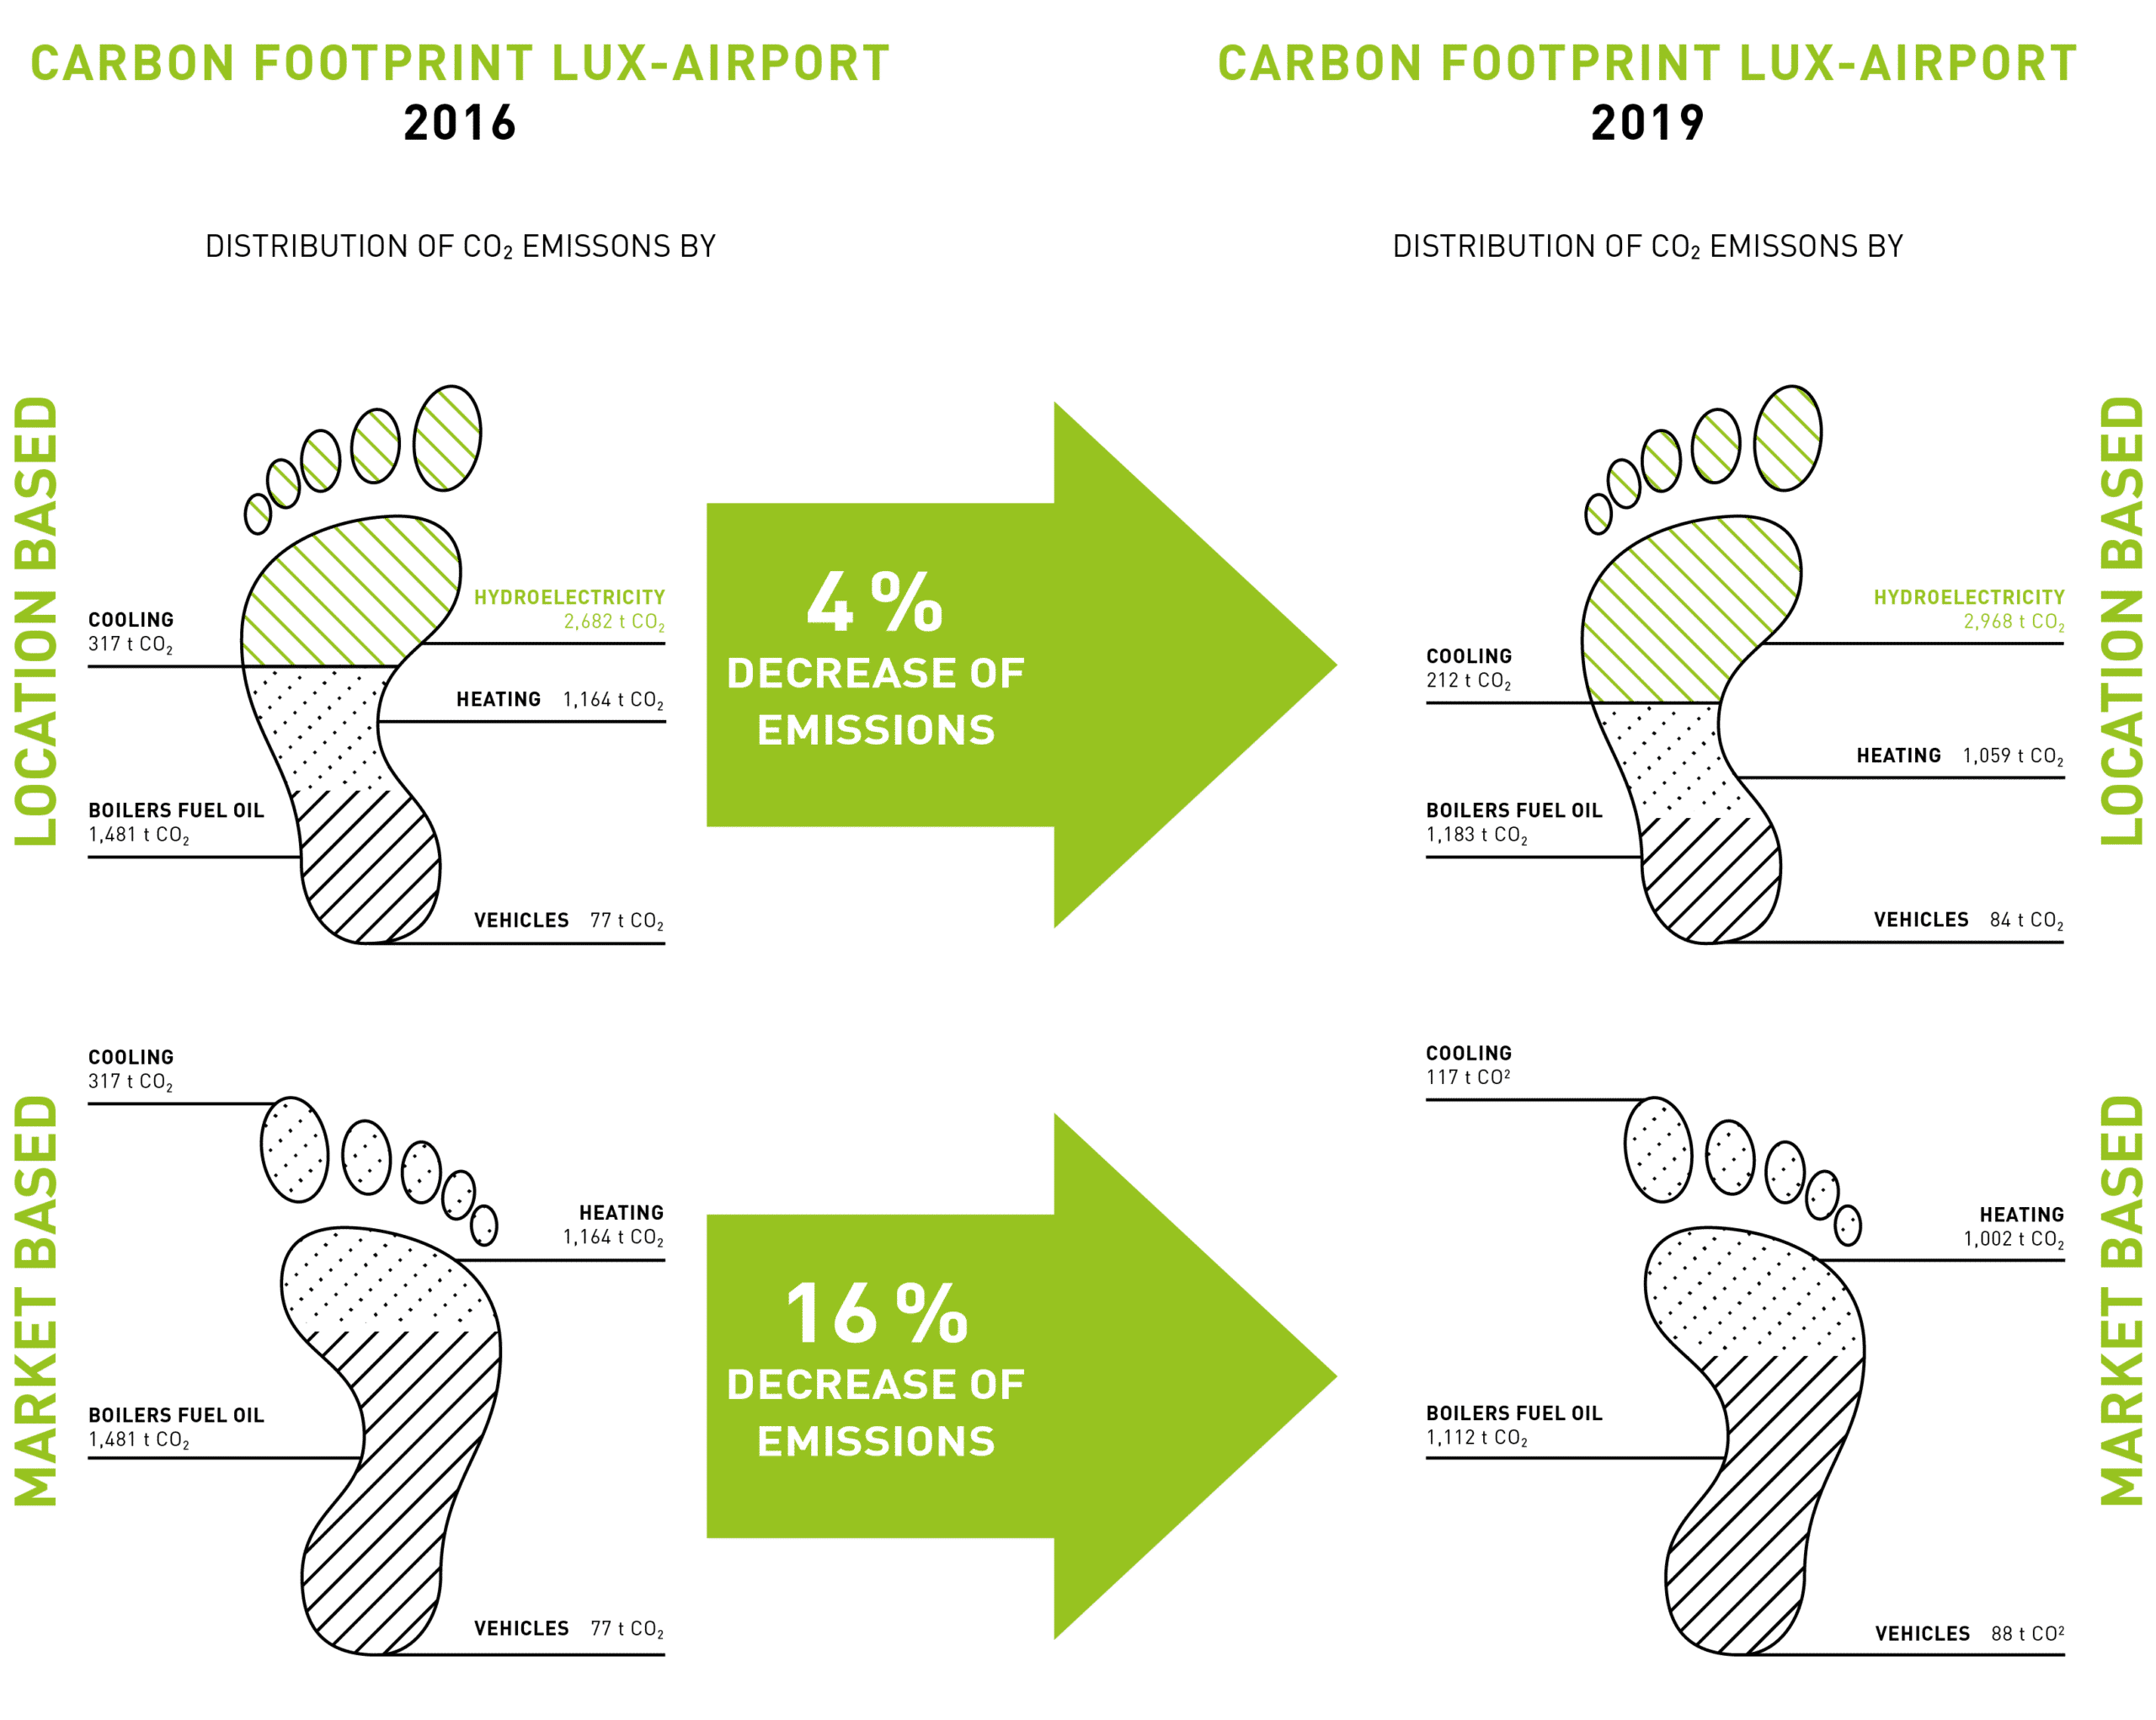 Carbon Footprint Lux-Airport